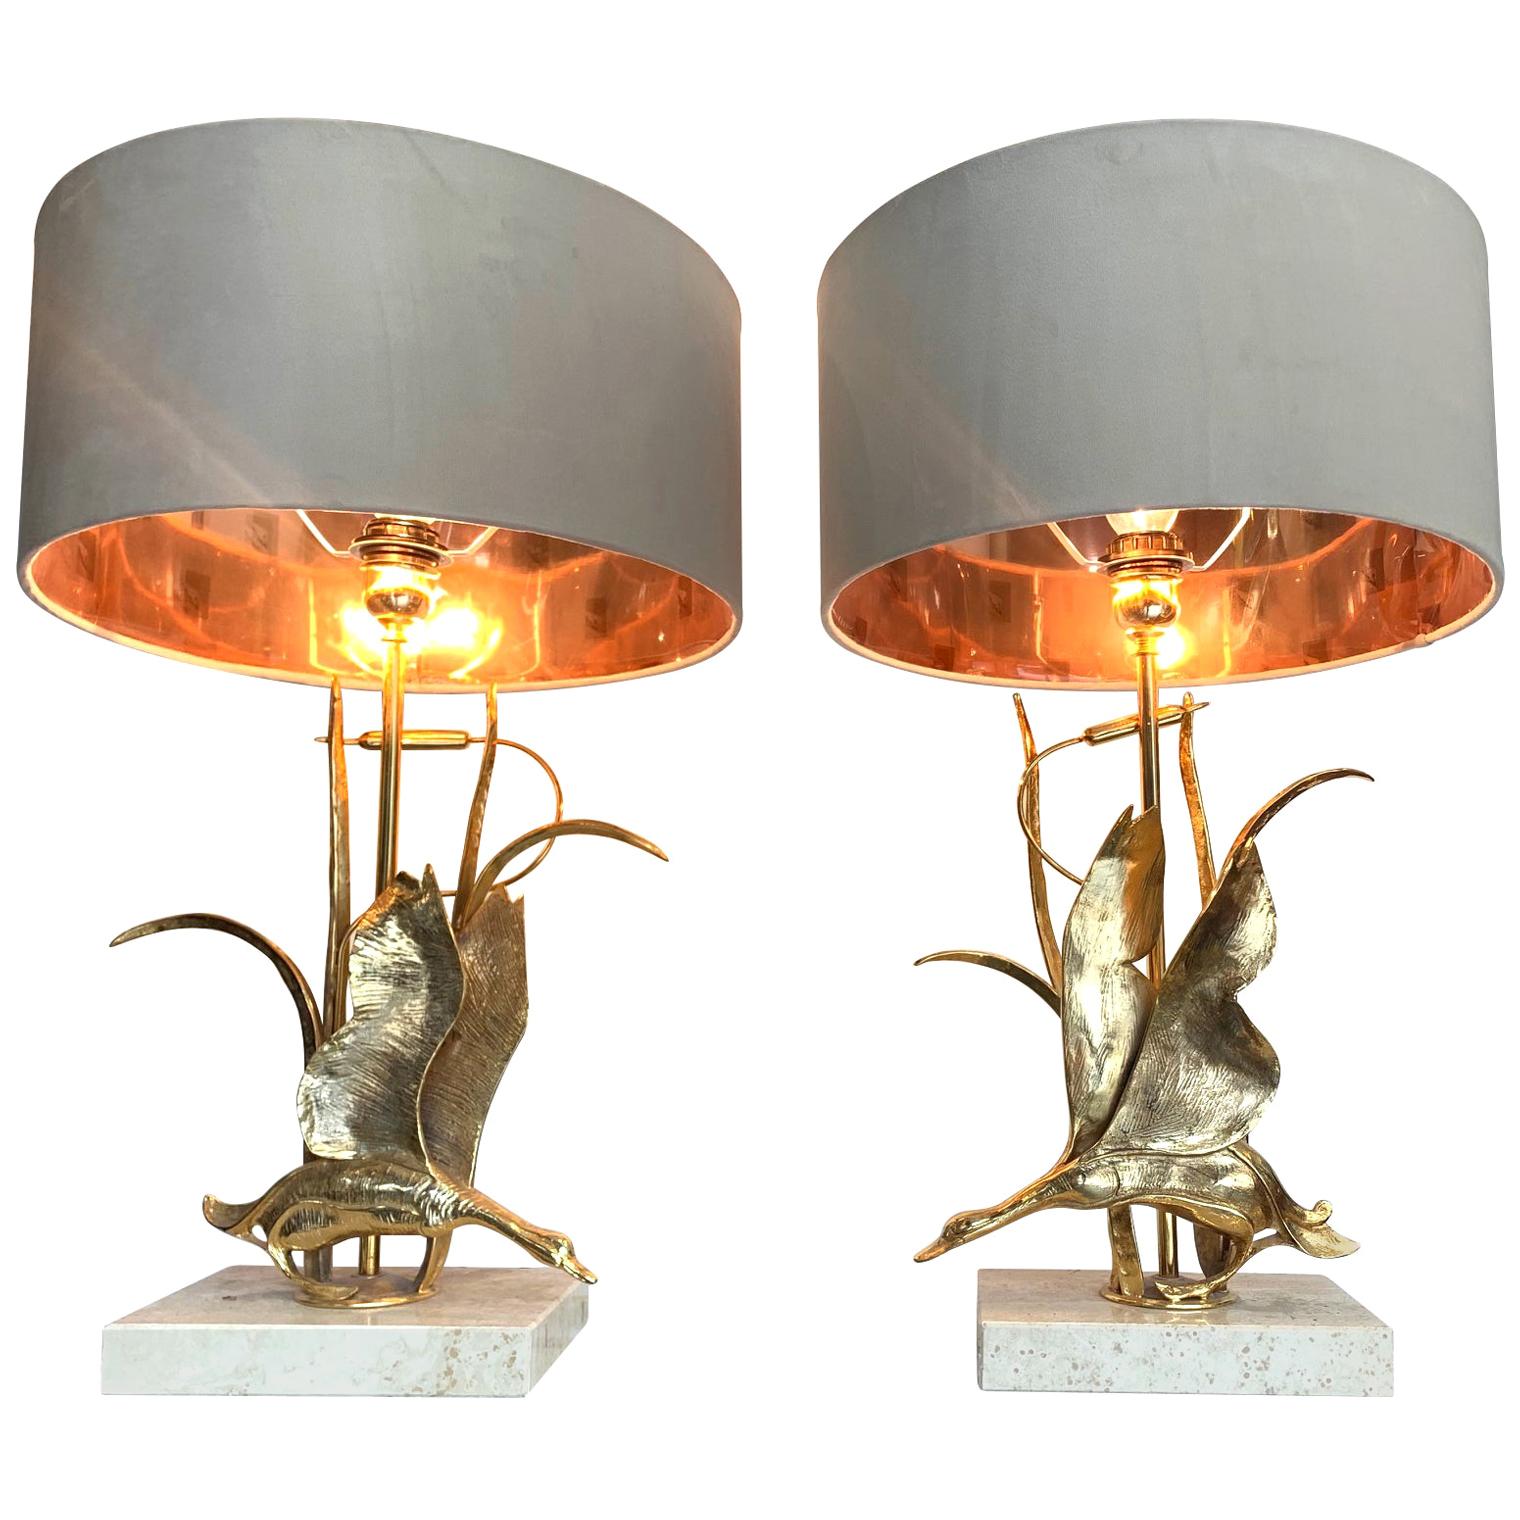 Lovely Pair of 1970s Brass Flying Duck Lamps on Travertine Bases by L. Galeotti